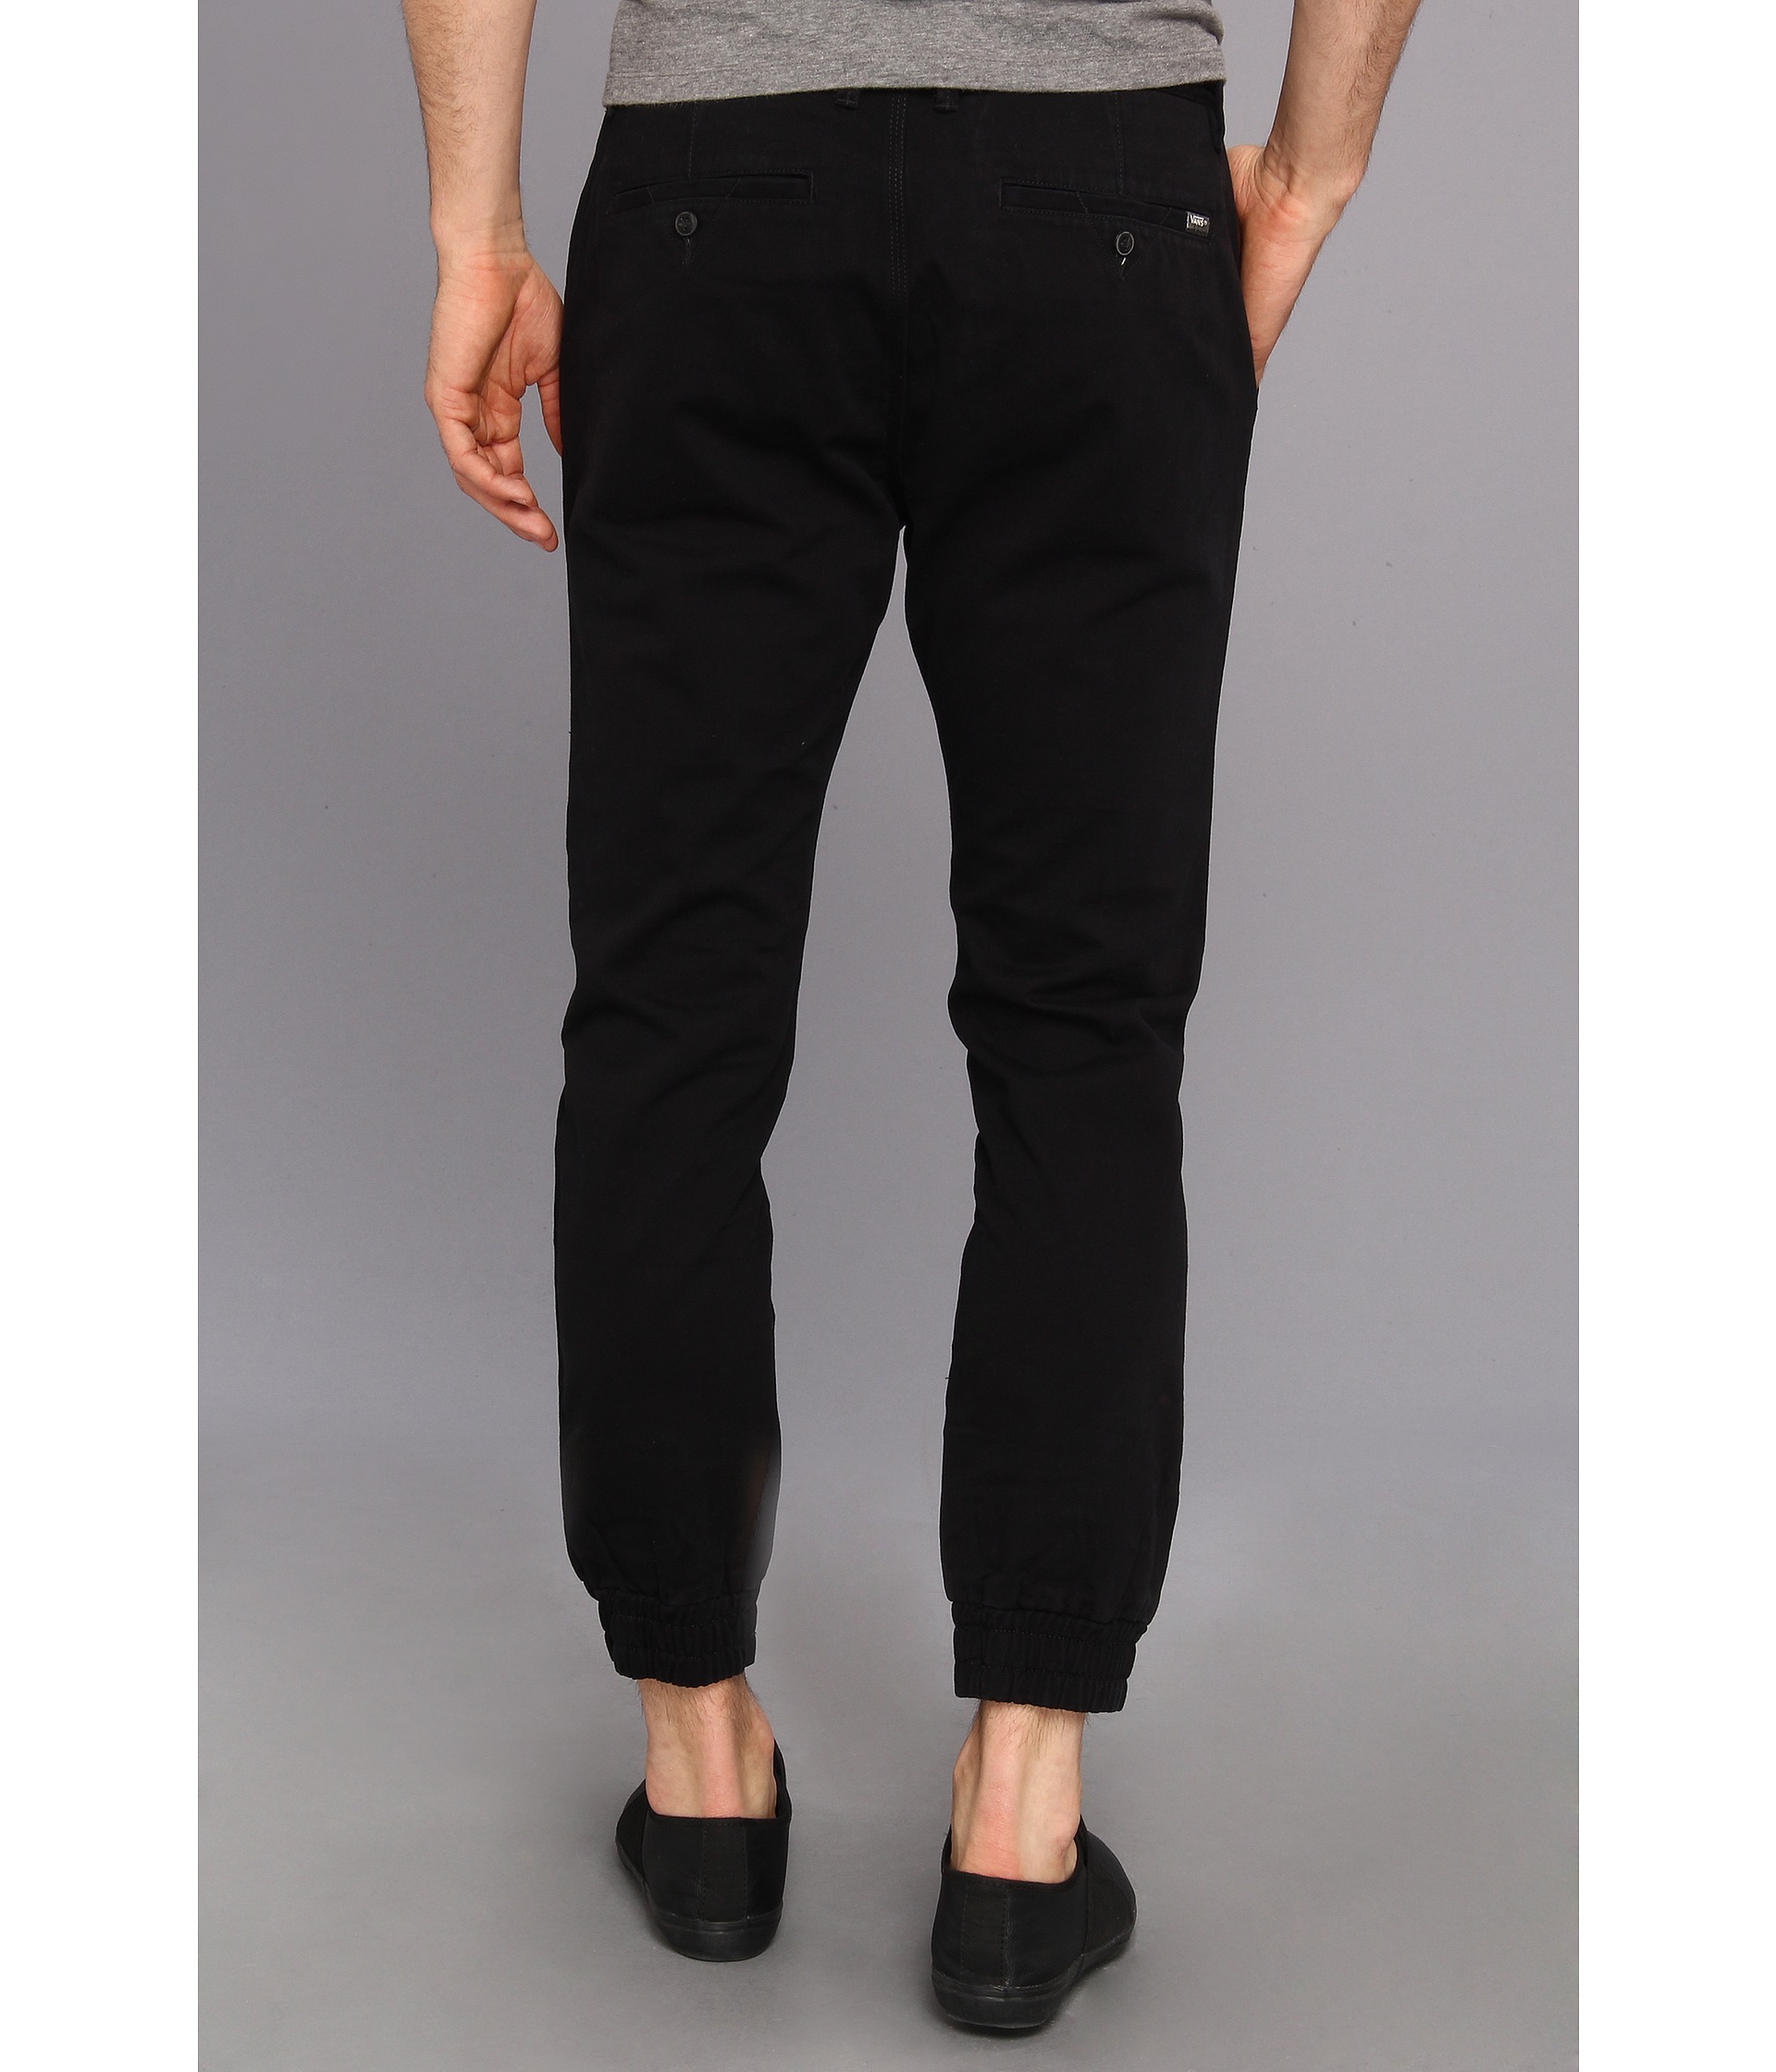 Vans Excerpt Chino Pegged Pant in Black for Men - Lyst